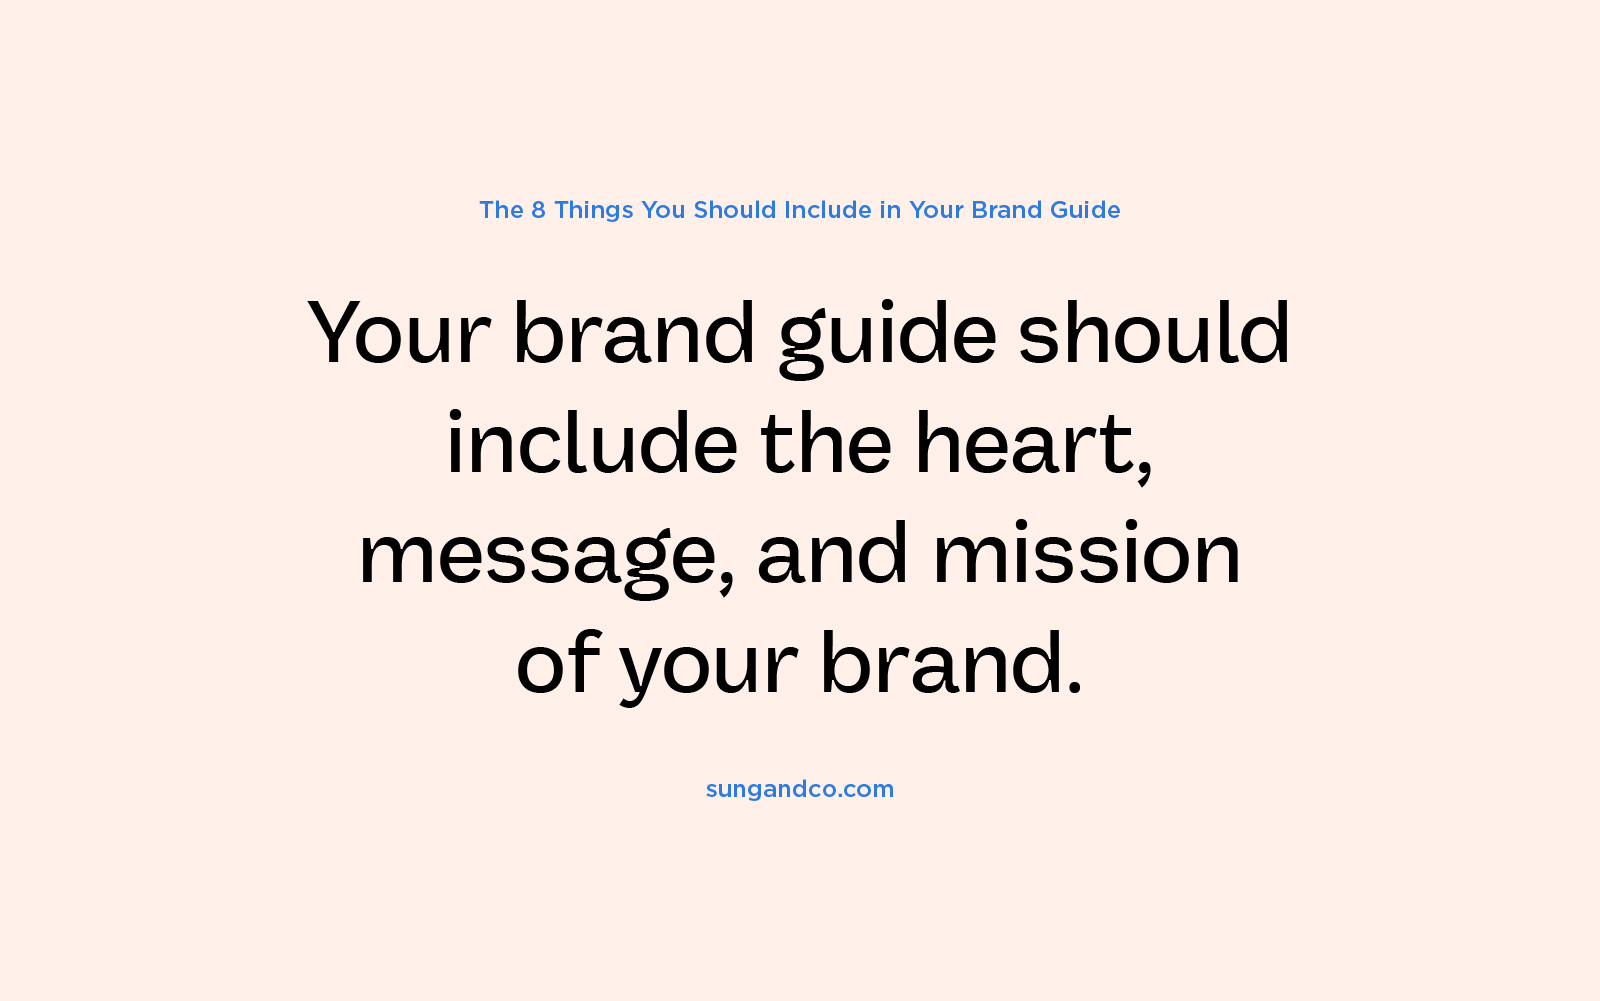 Your brand guide should include the heart, message, and mission of your brand.